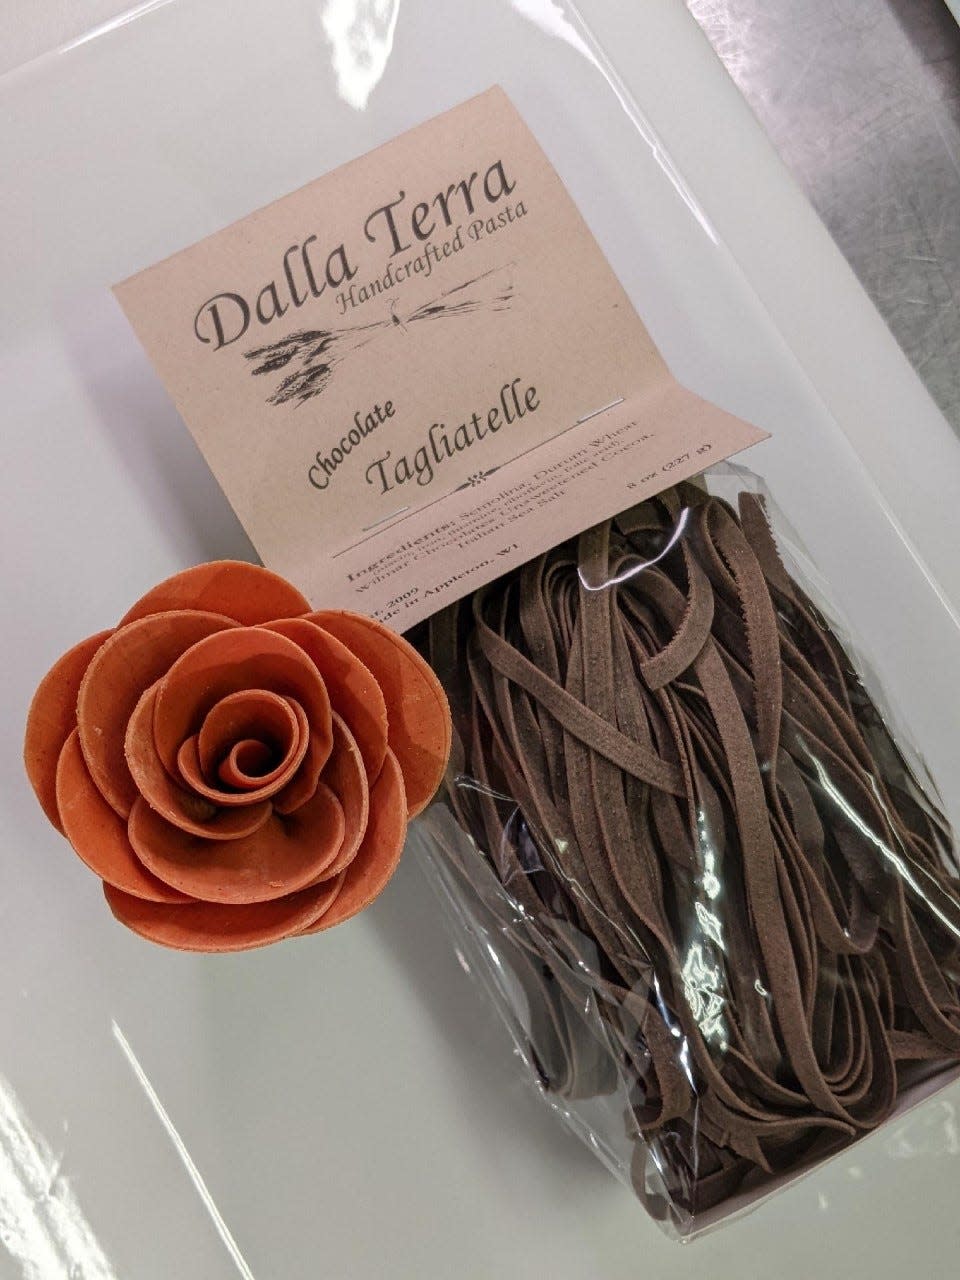 Made with unsweetened cocoa, chocolate tagliatelle is one of Dalla Terra’s more unique pastas that can be made as a savory pasta.